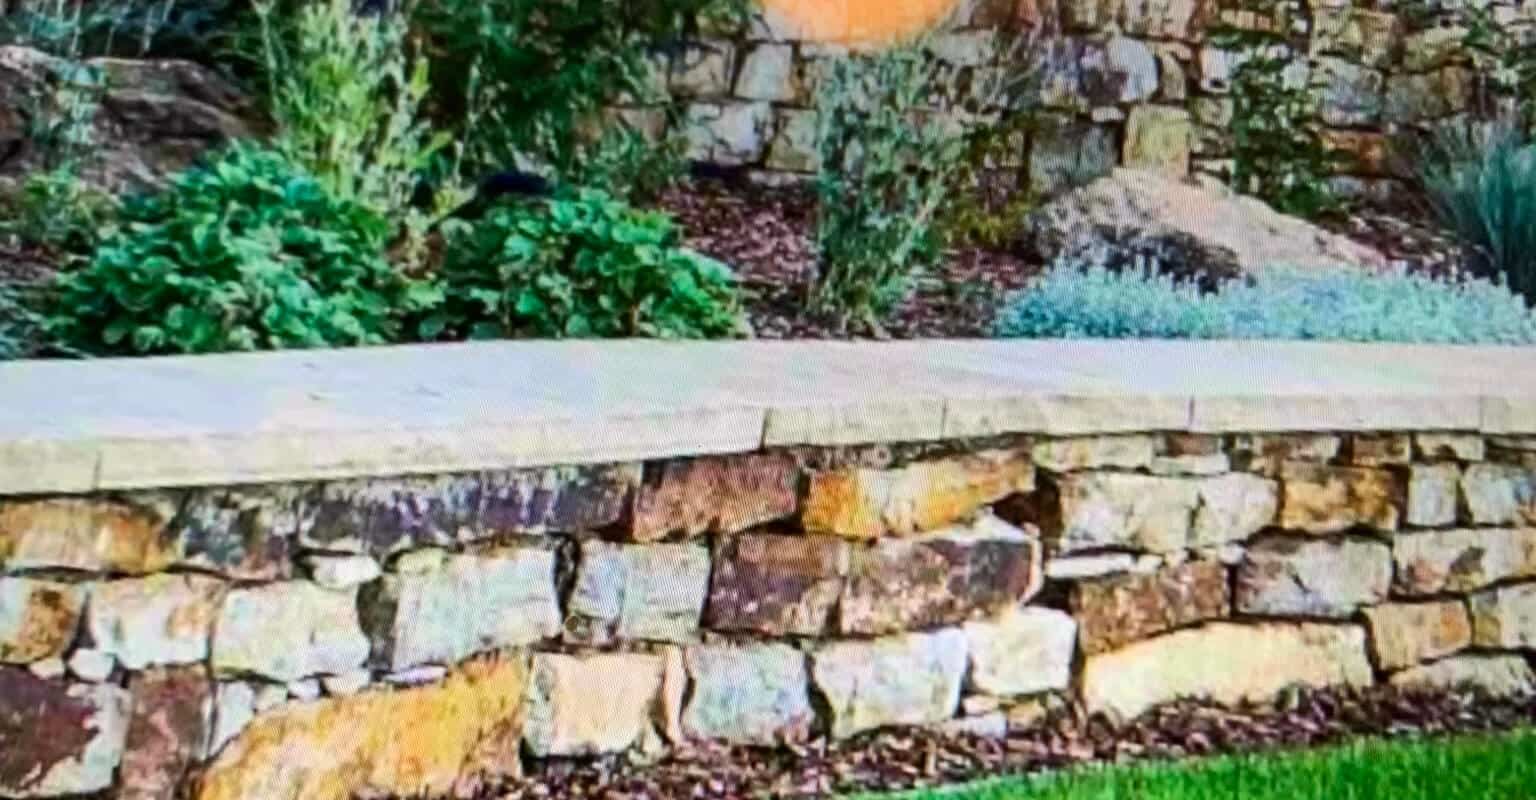 Natural Stone Retaining Wall with Planter